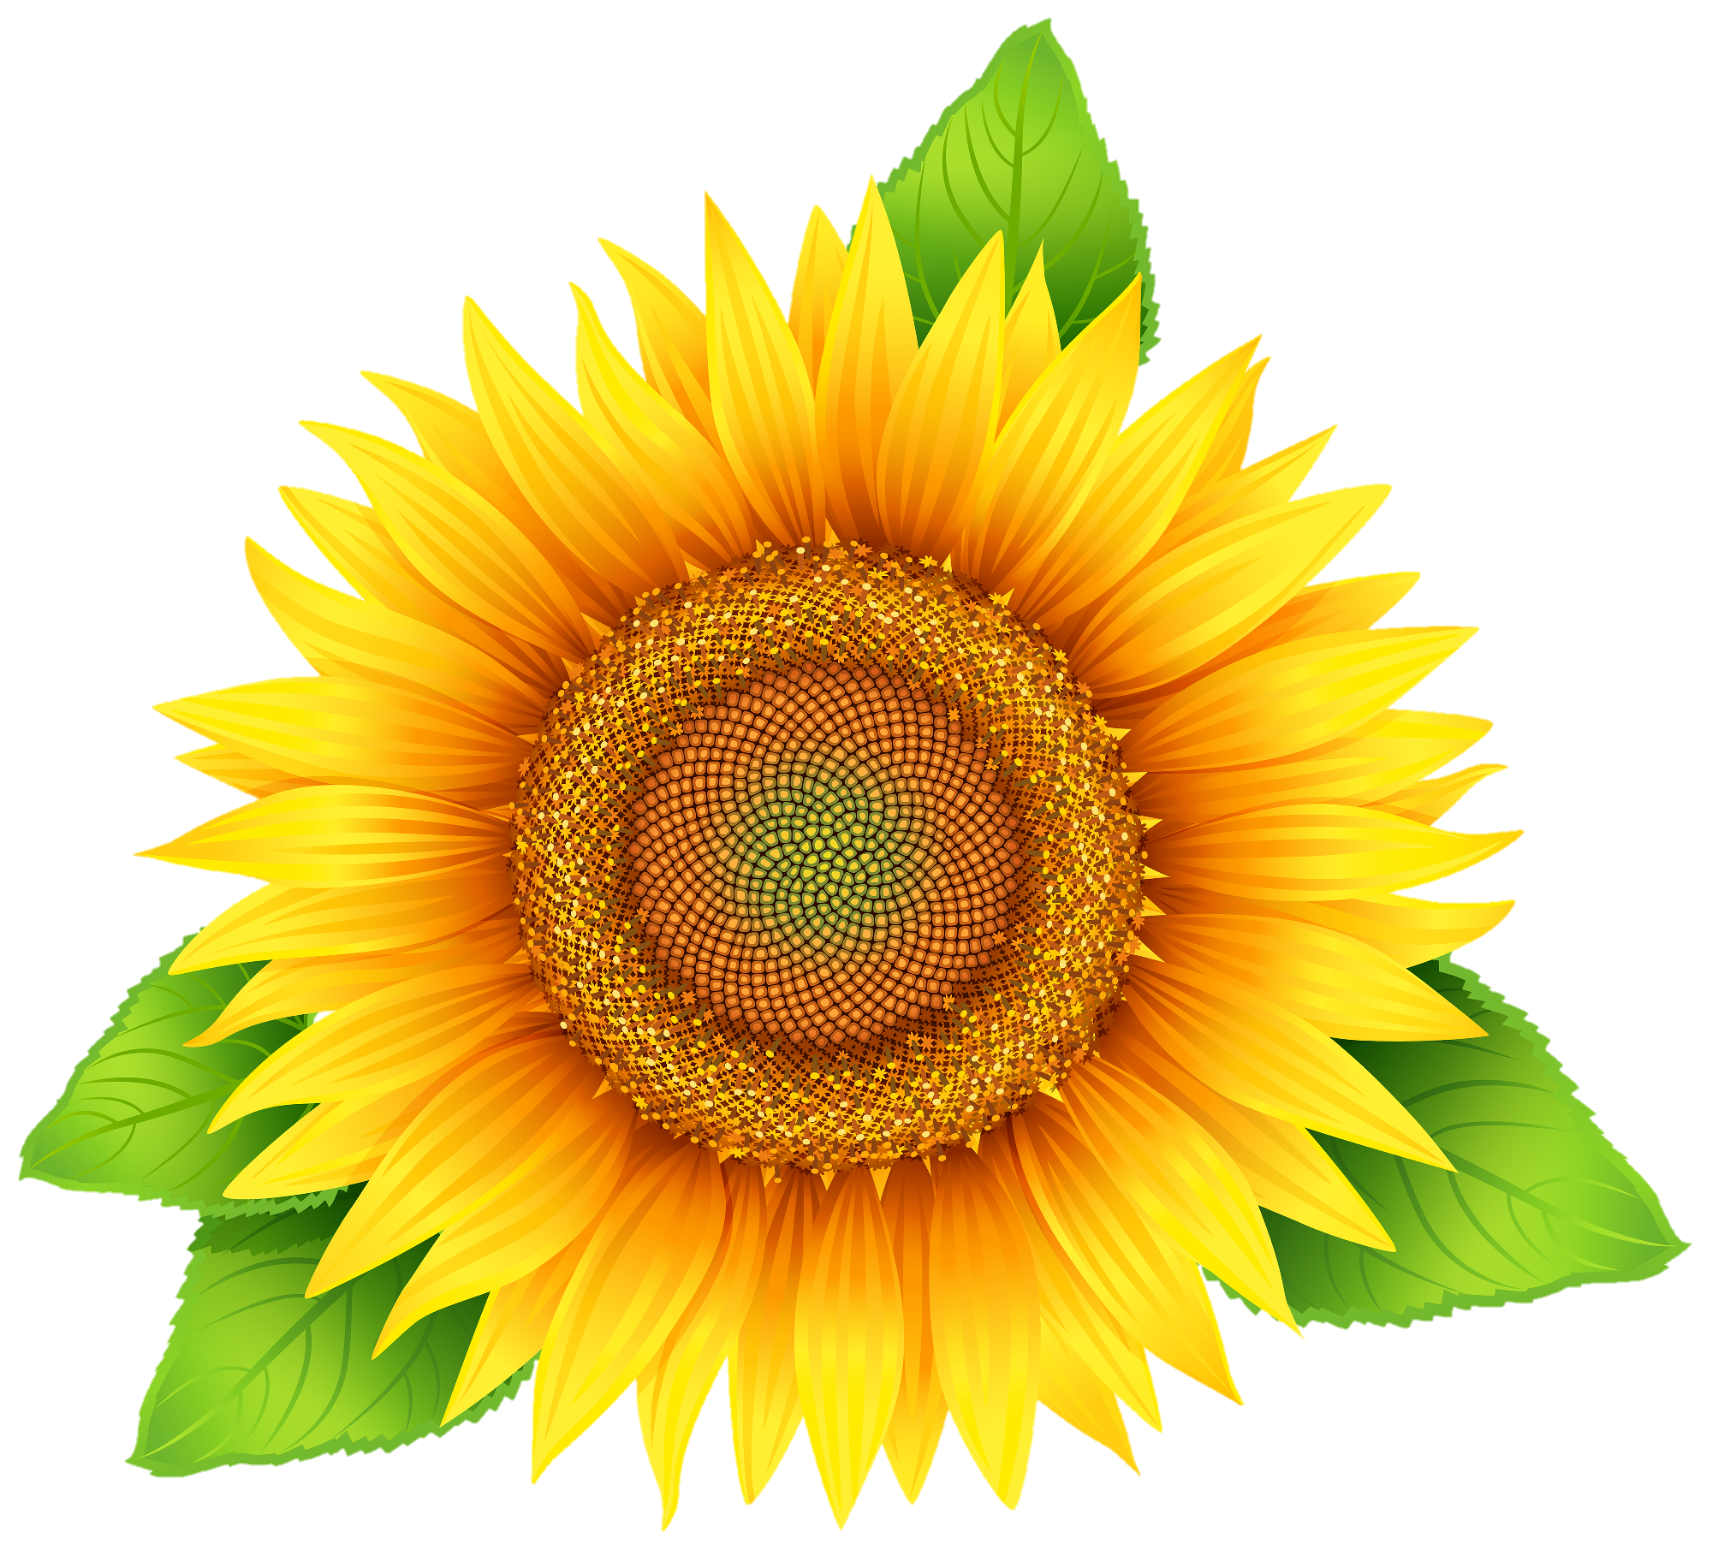 sunflower-png-image-from-pngfre-2-1